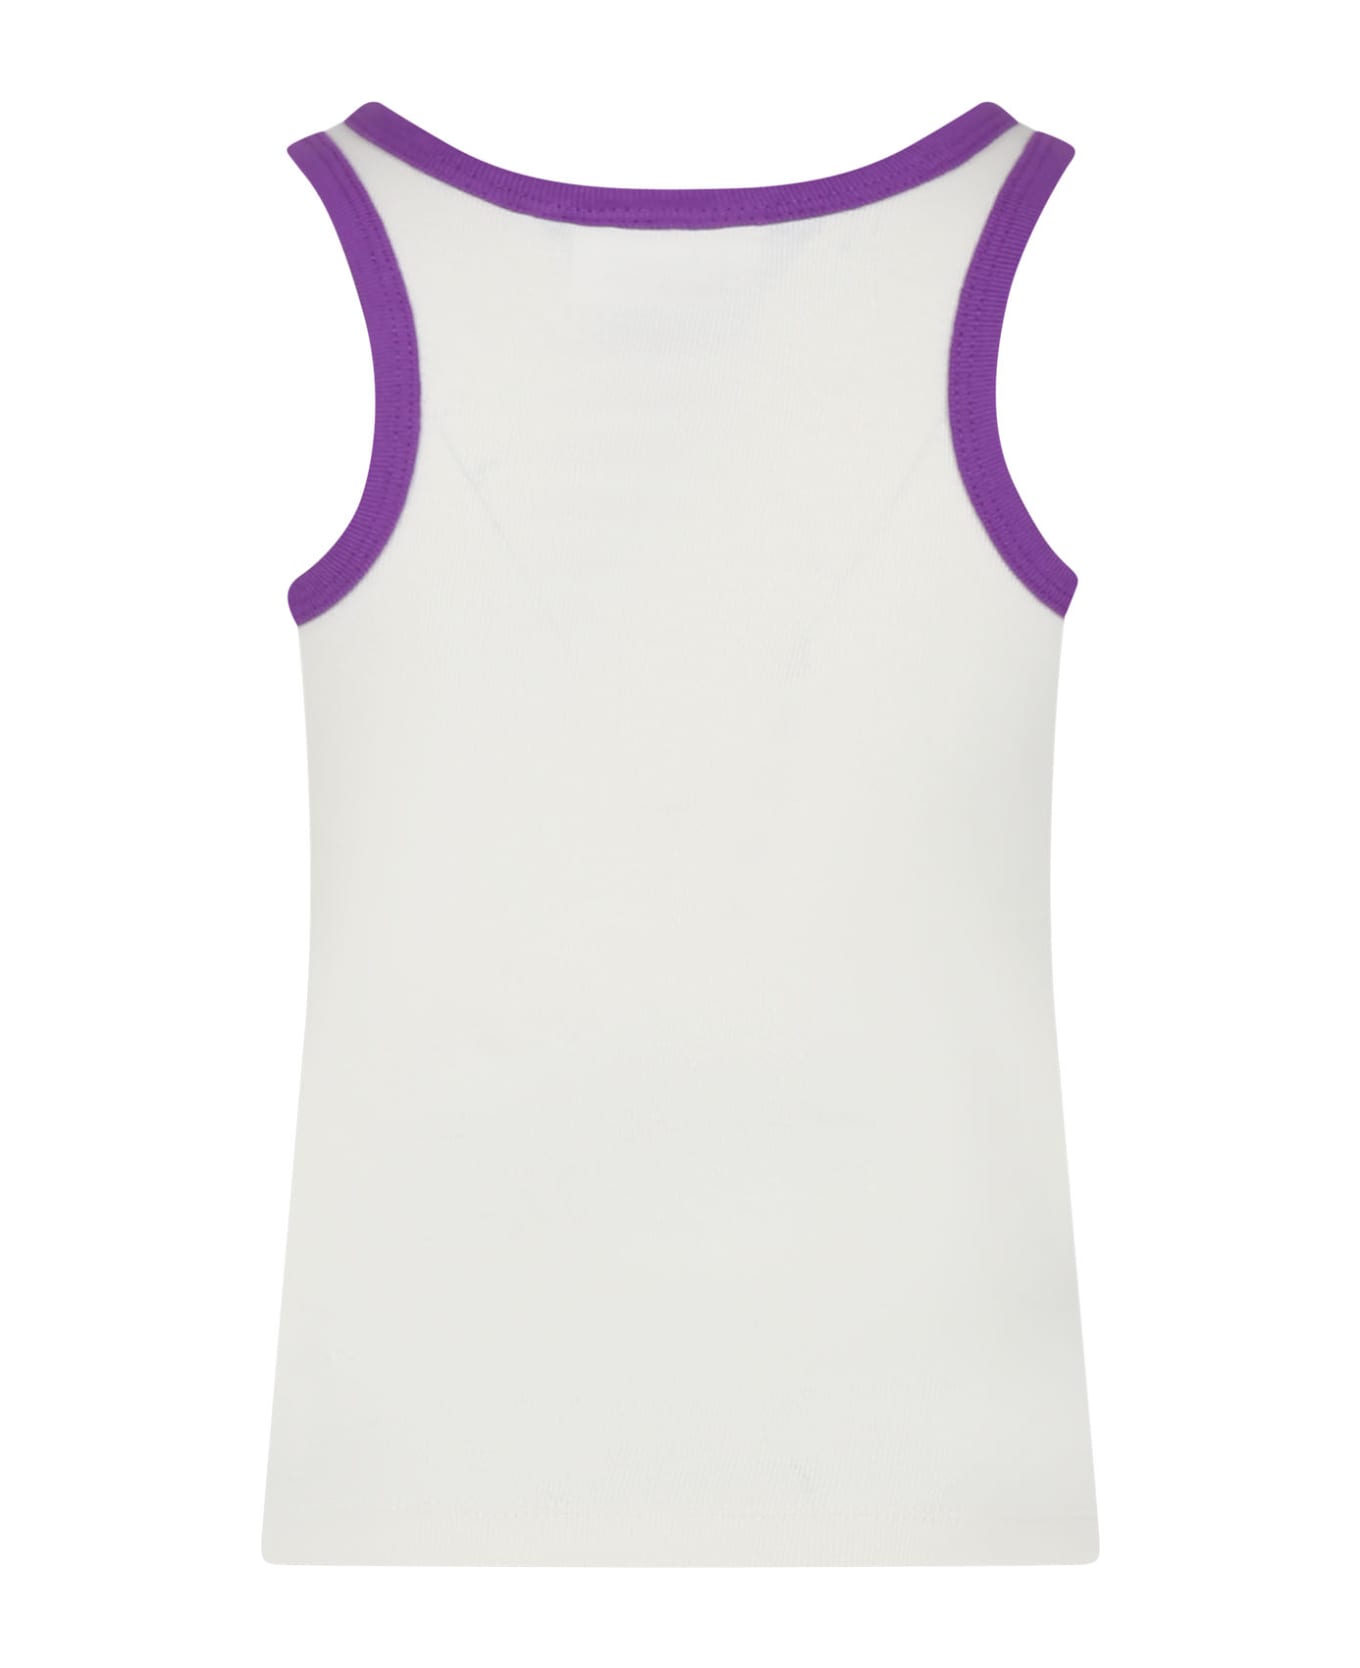 Molo Ivory Tank Top For Girl With Hearts Print - Ivory Tシャツ＆ポロシャツ